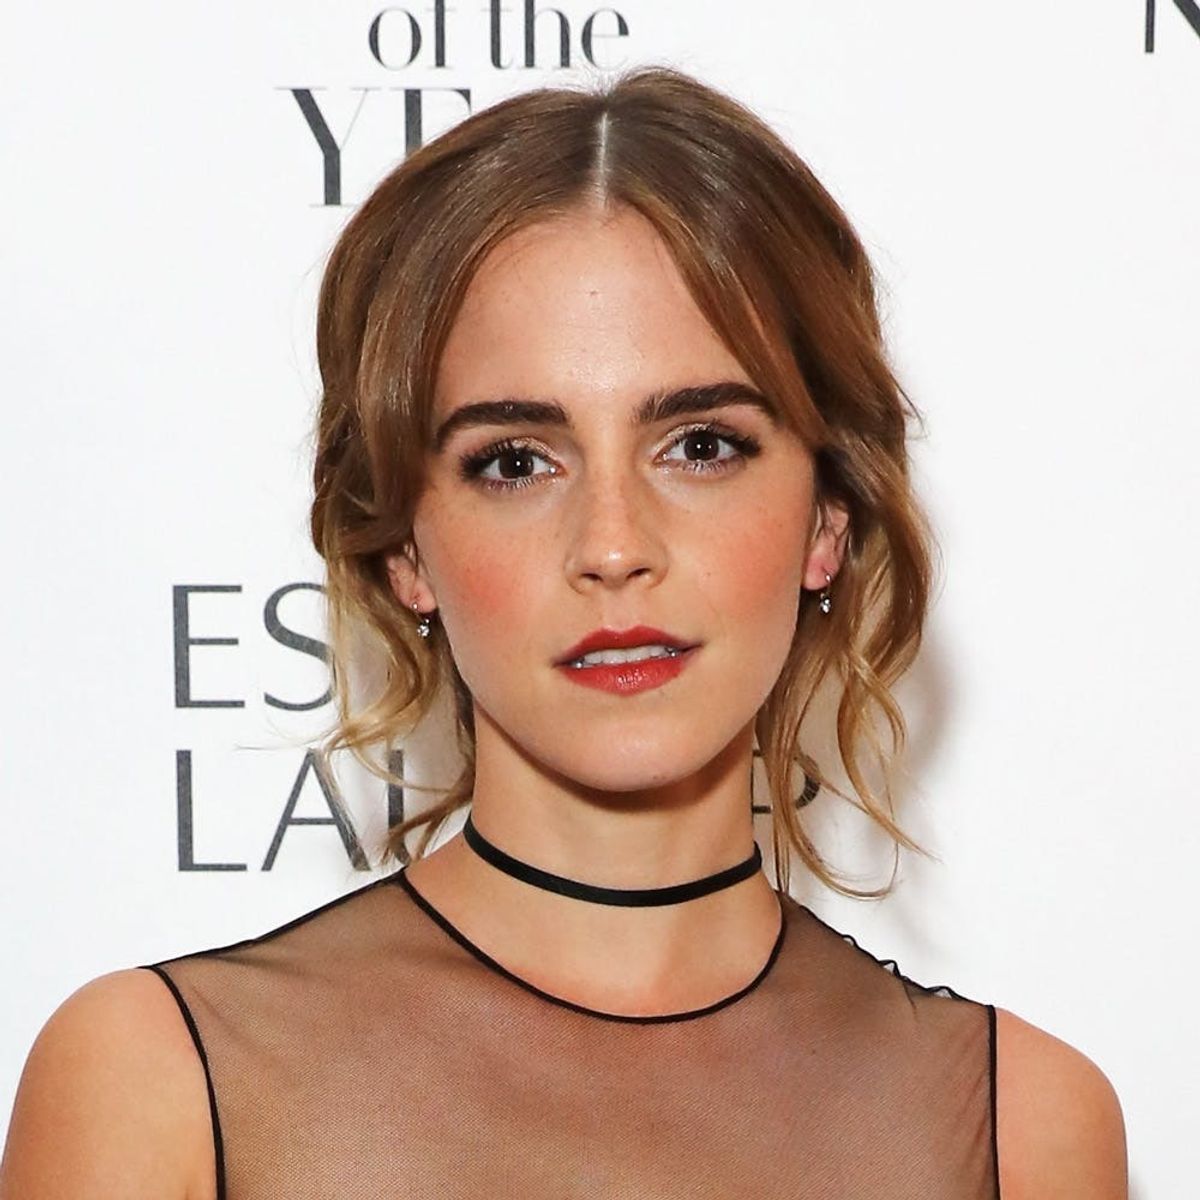 Emma Watson Reveals Why She Chose to Play Belle Instead of Cinderella